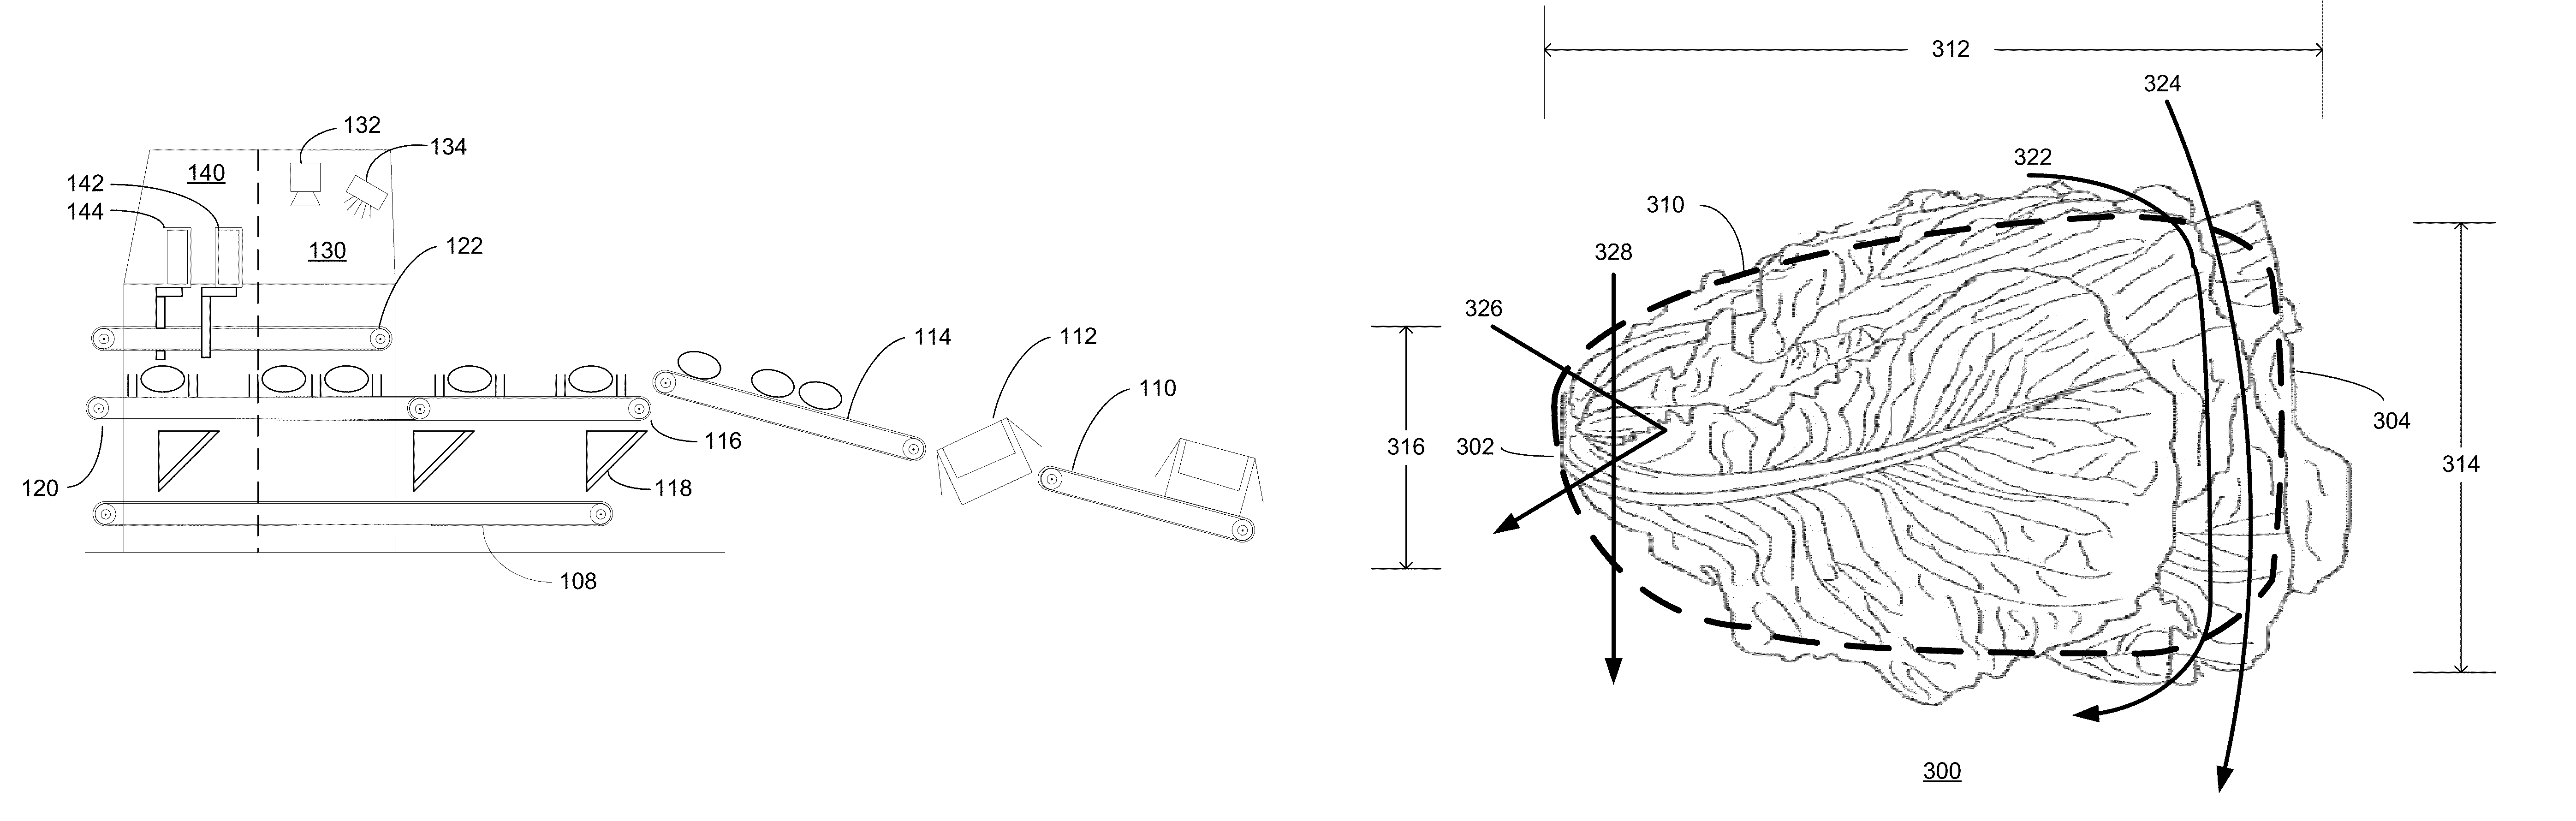 System for topping and tailing lettuce heads using a camera-guided servo-controlled water knife